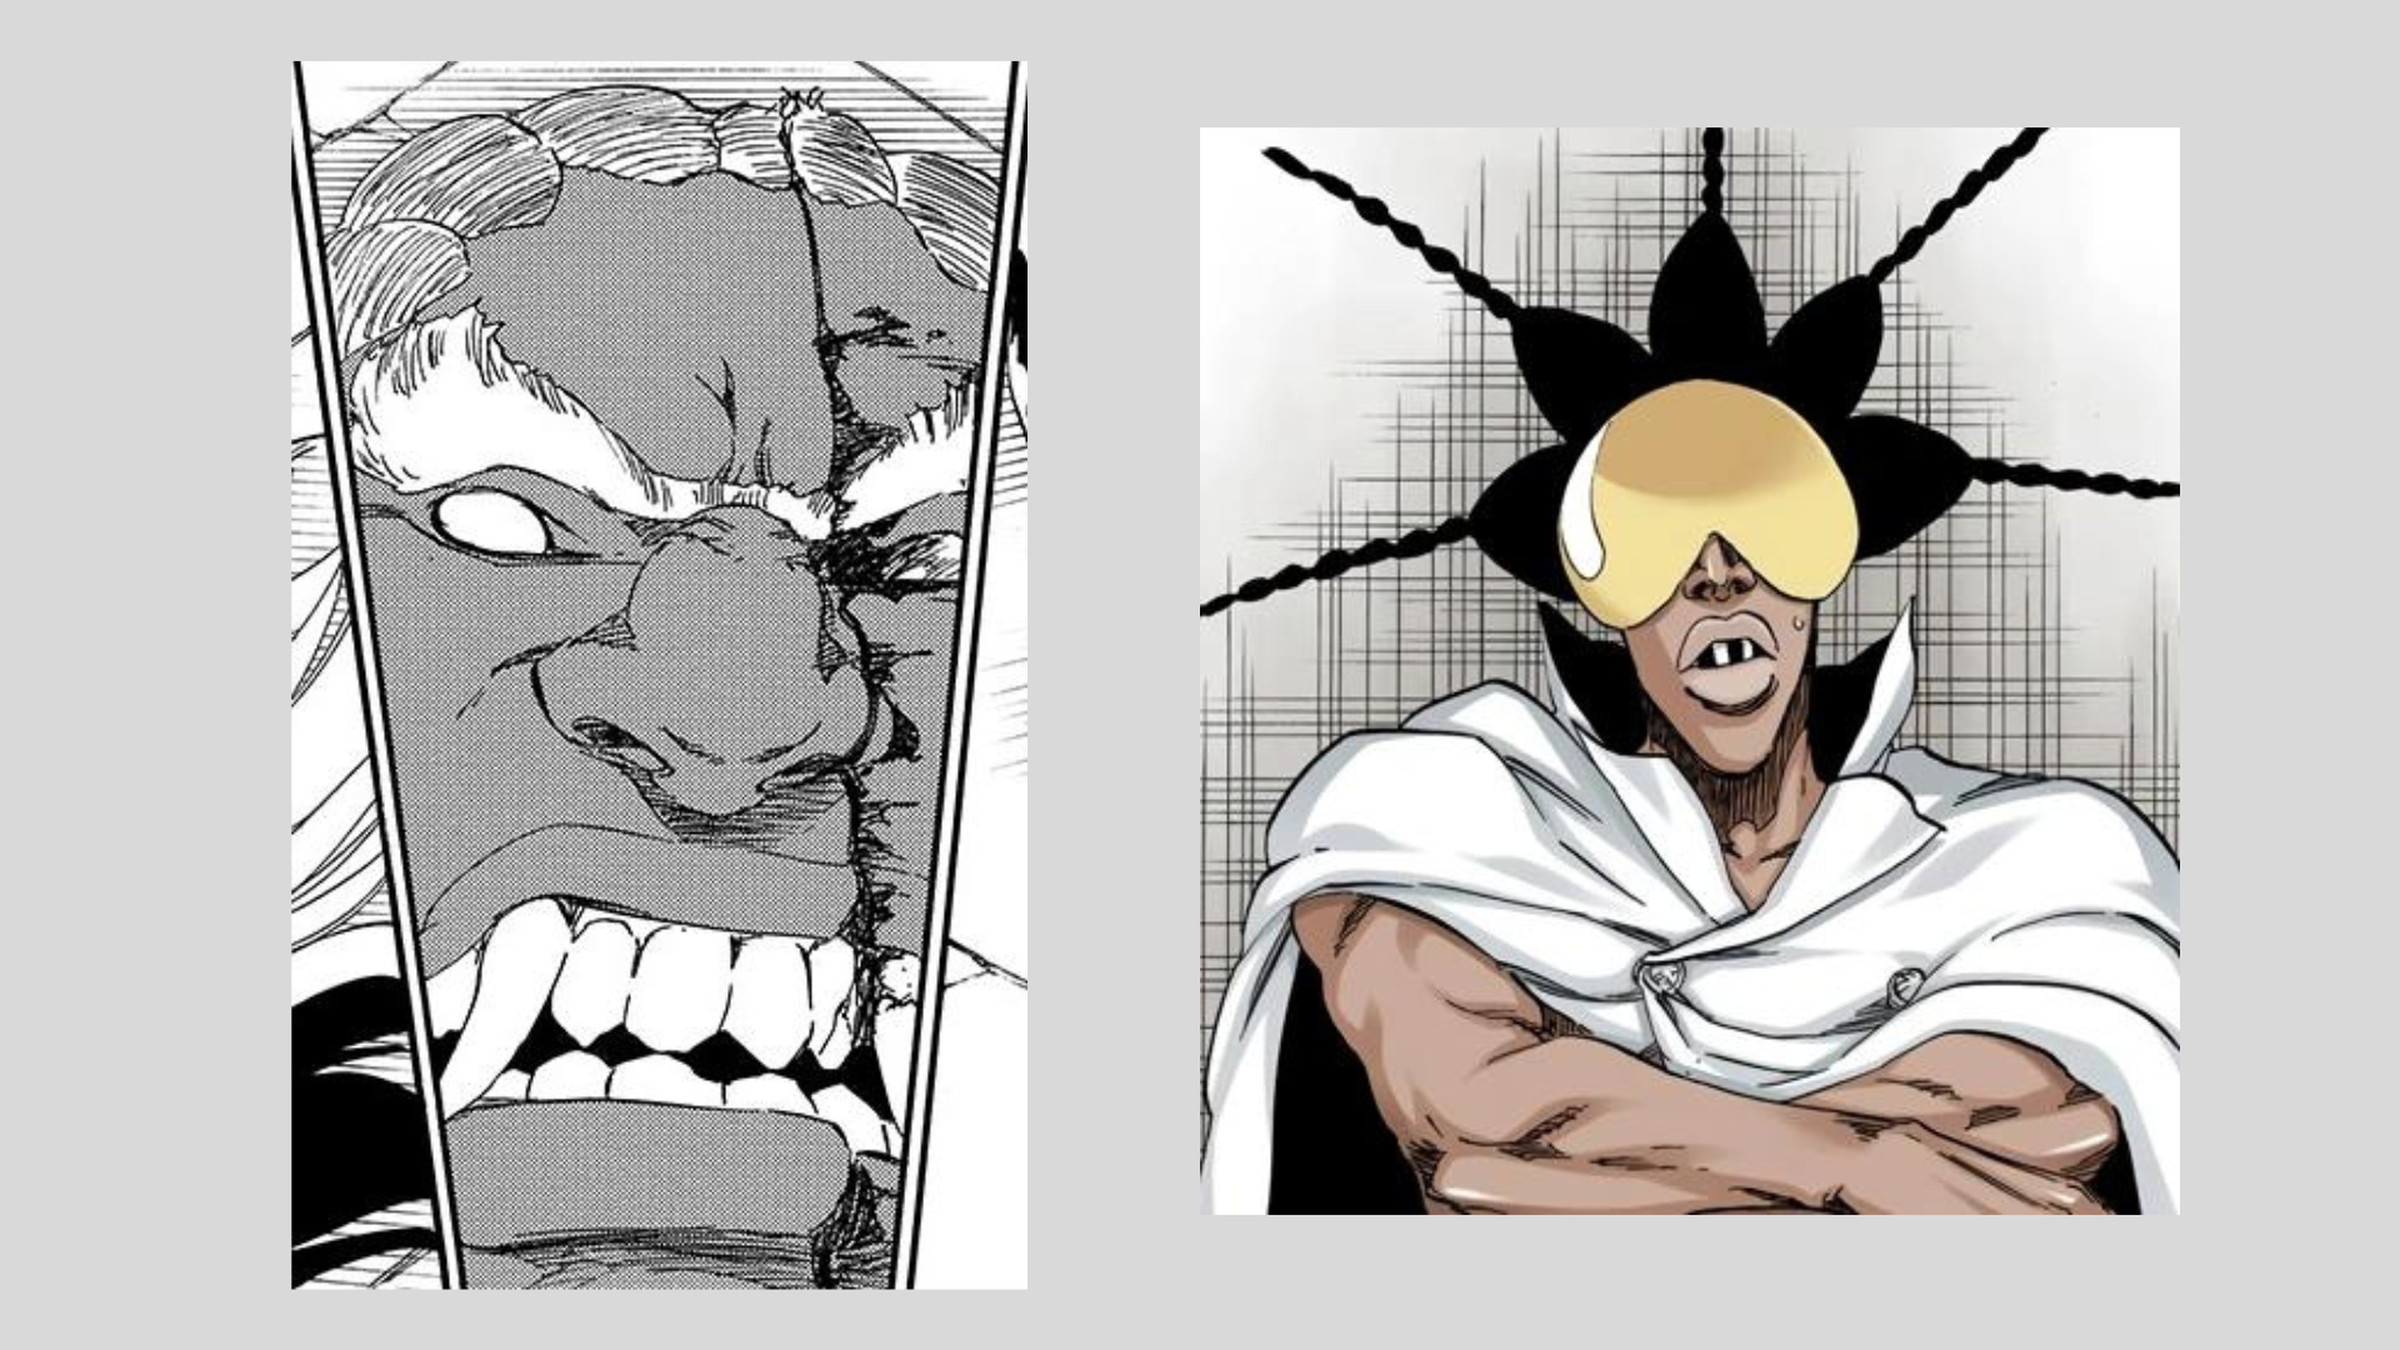 Composite image of two characters from the manga Bleach including Left: Jerome Guizbatt, a montrous, darkskinned man with ape-like features who dies almost immediately upon his reveal. Right: NaNaNa Najahkoop, another darkskinned man with braids sticking straight out of his head and black and white checkered teeth.